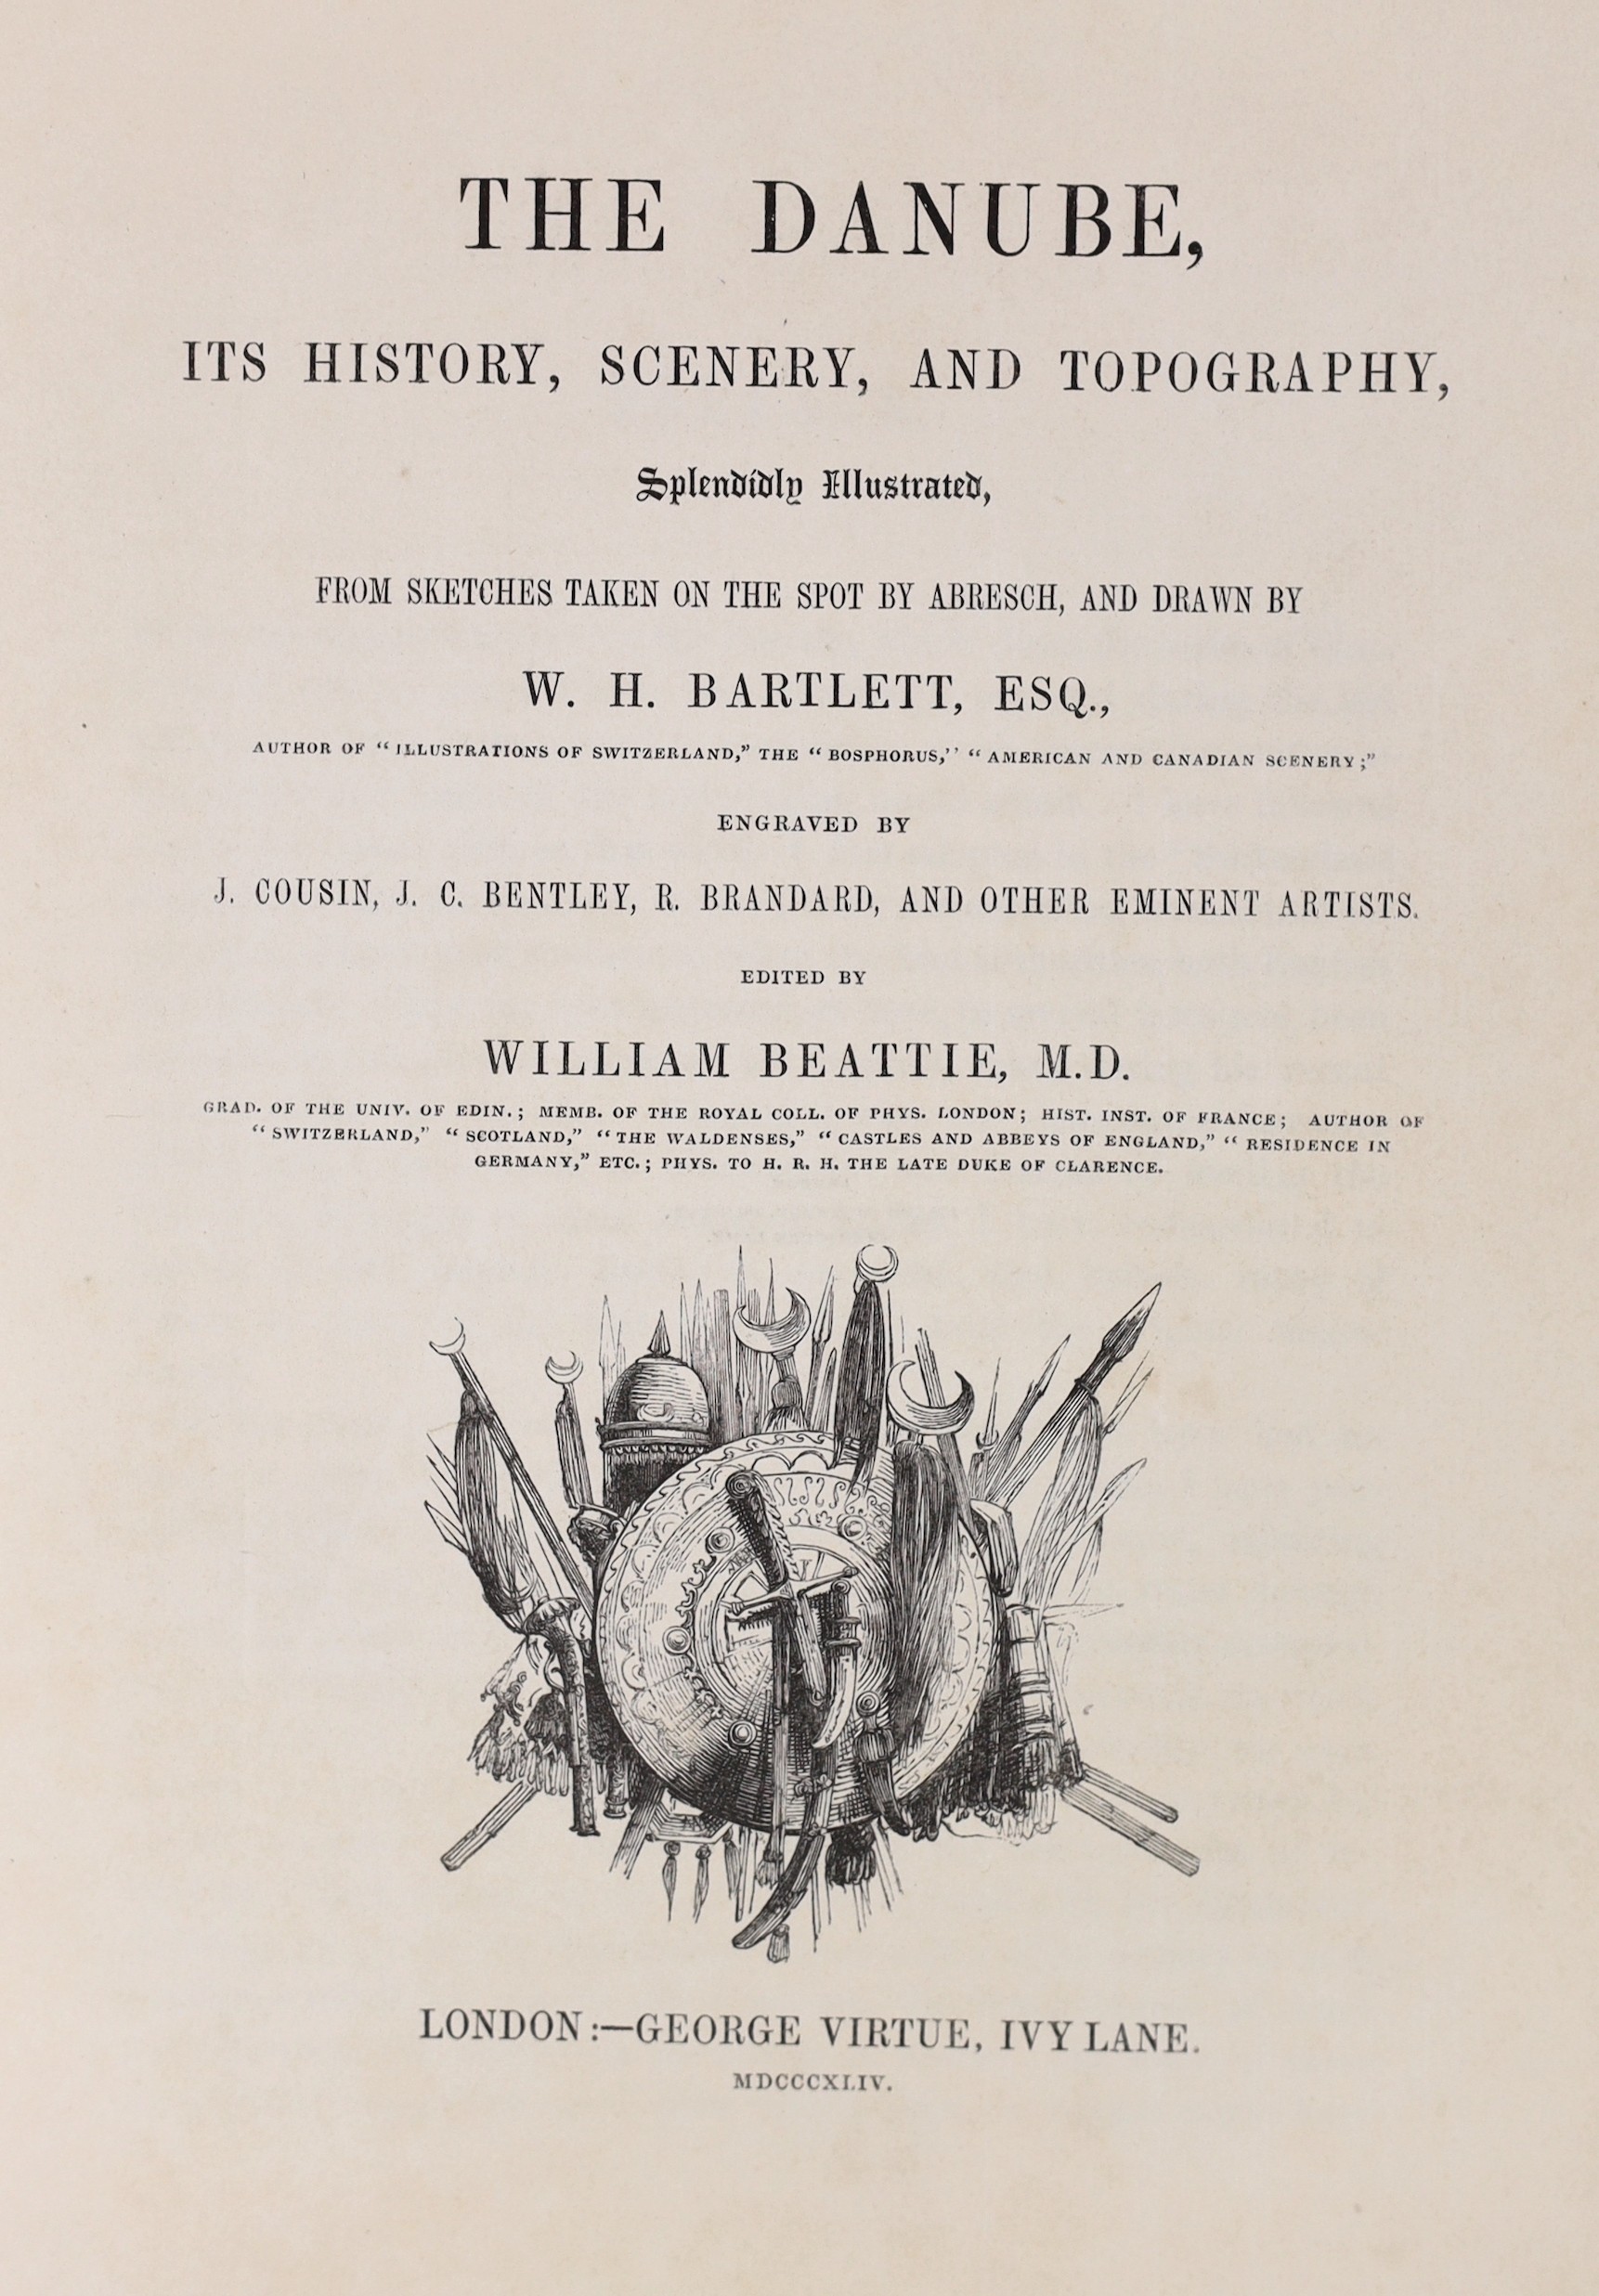 Beattie, William (editor) - The Danube, its history, scenery, and topography ... engraved pictorial and printed titles, map, 78 steel-engraved plates (after W.H. Bartlett) and num. engraved text illus.; contemp. green ha